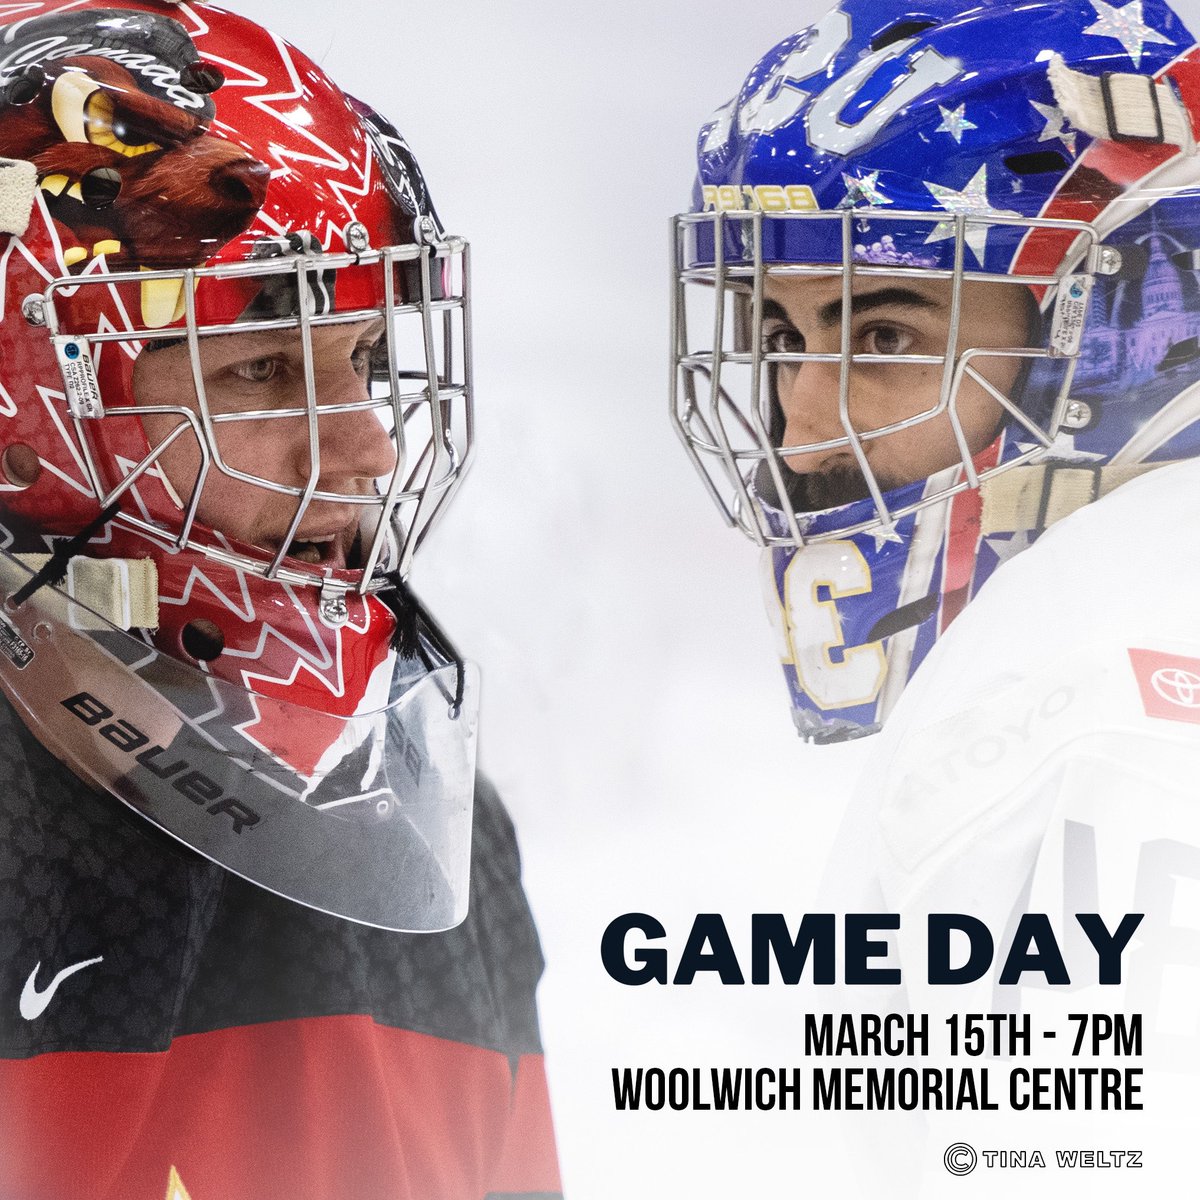 Don’t miss your chance to witness a hockey battle between Canada and USA this week. Come to the Woolwich Memorial Centre and cheer on your favourite team as they take to the ice for three games this week.

#parahockey #sledgehockey #teamcanada #teamusa #hockeycanada 
📸TinaWeltz